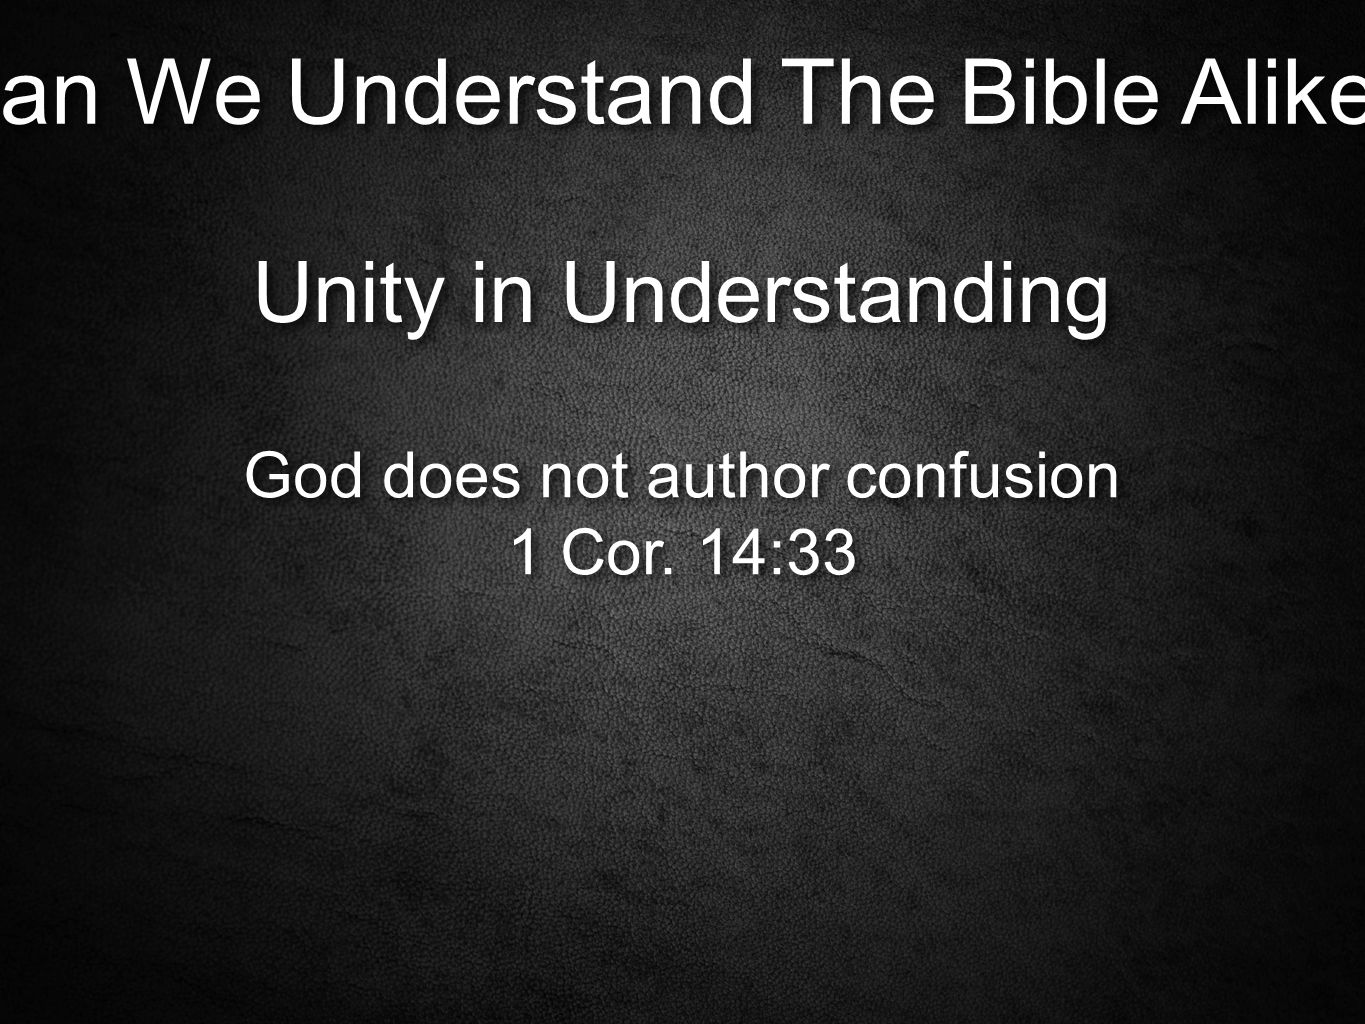 Can We Understand The Bible Alike. Unity in Understanding God does not author confusion 1 Cor.